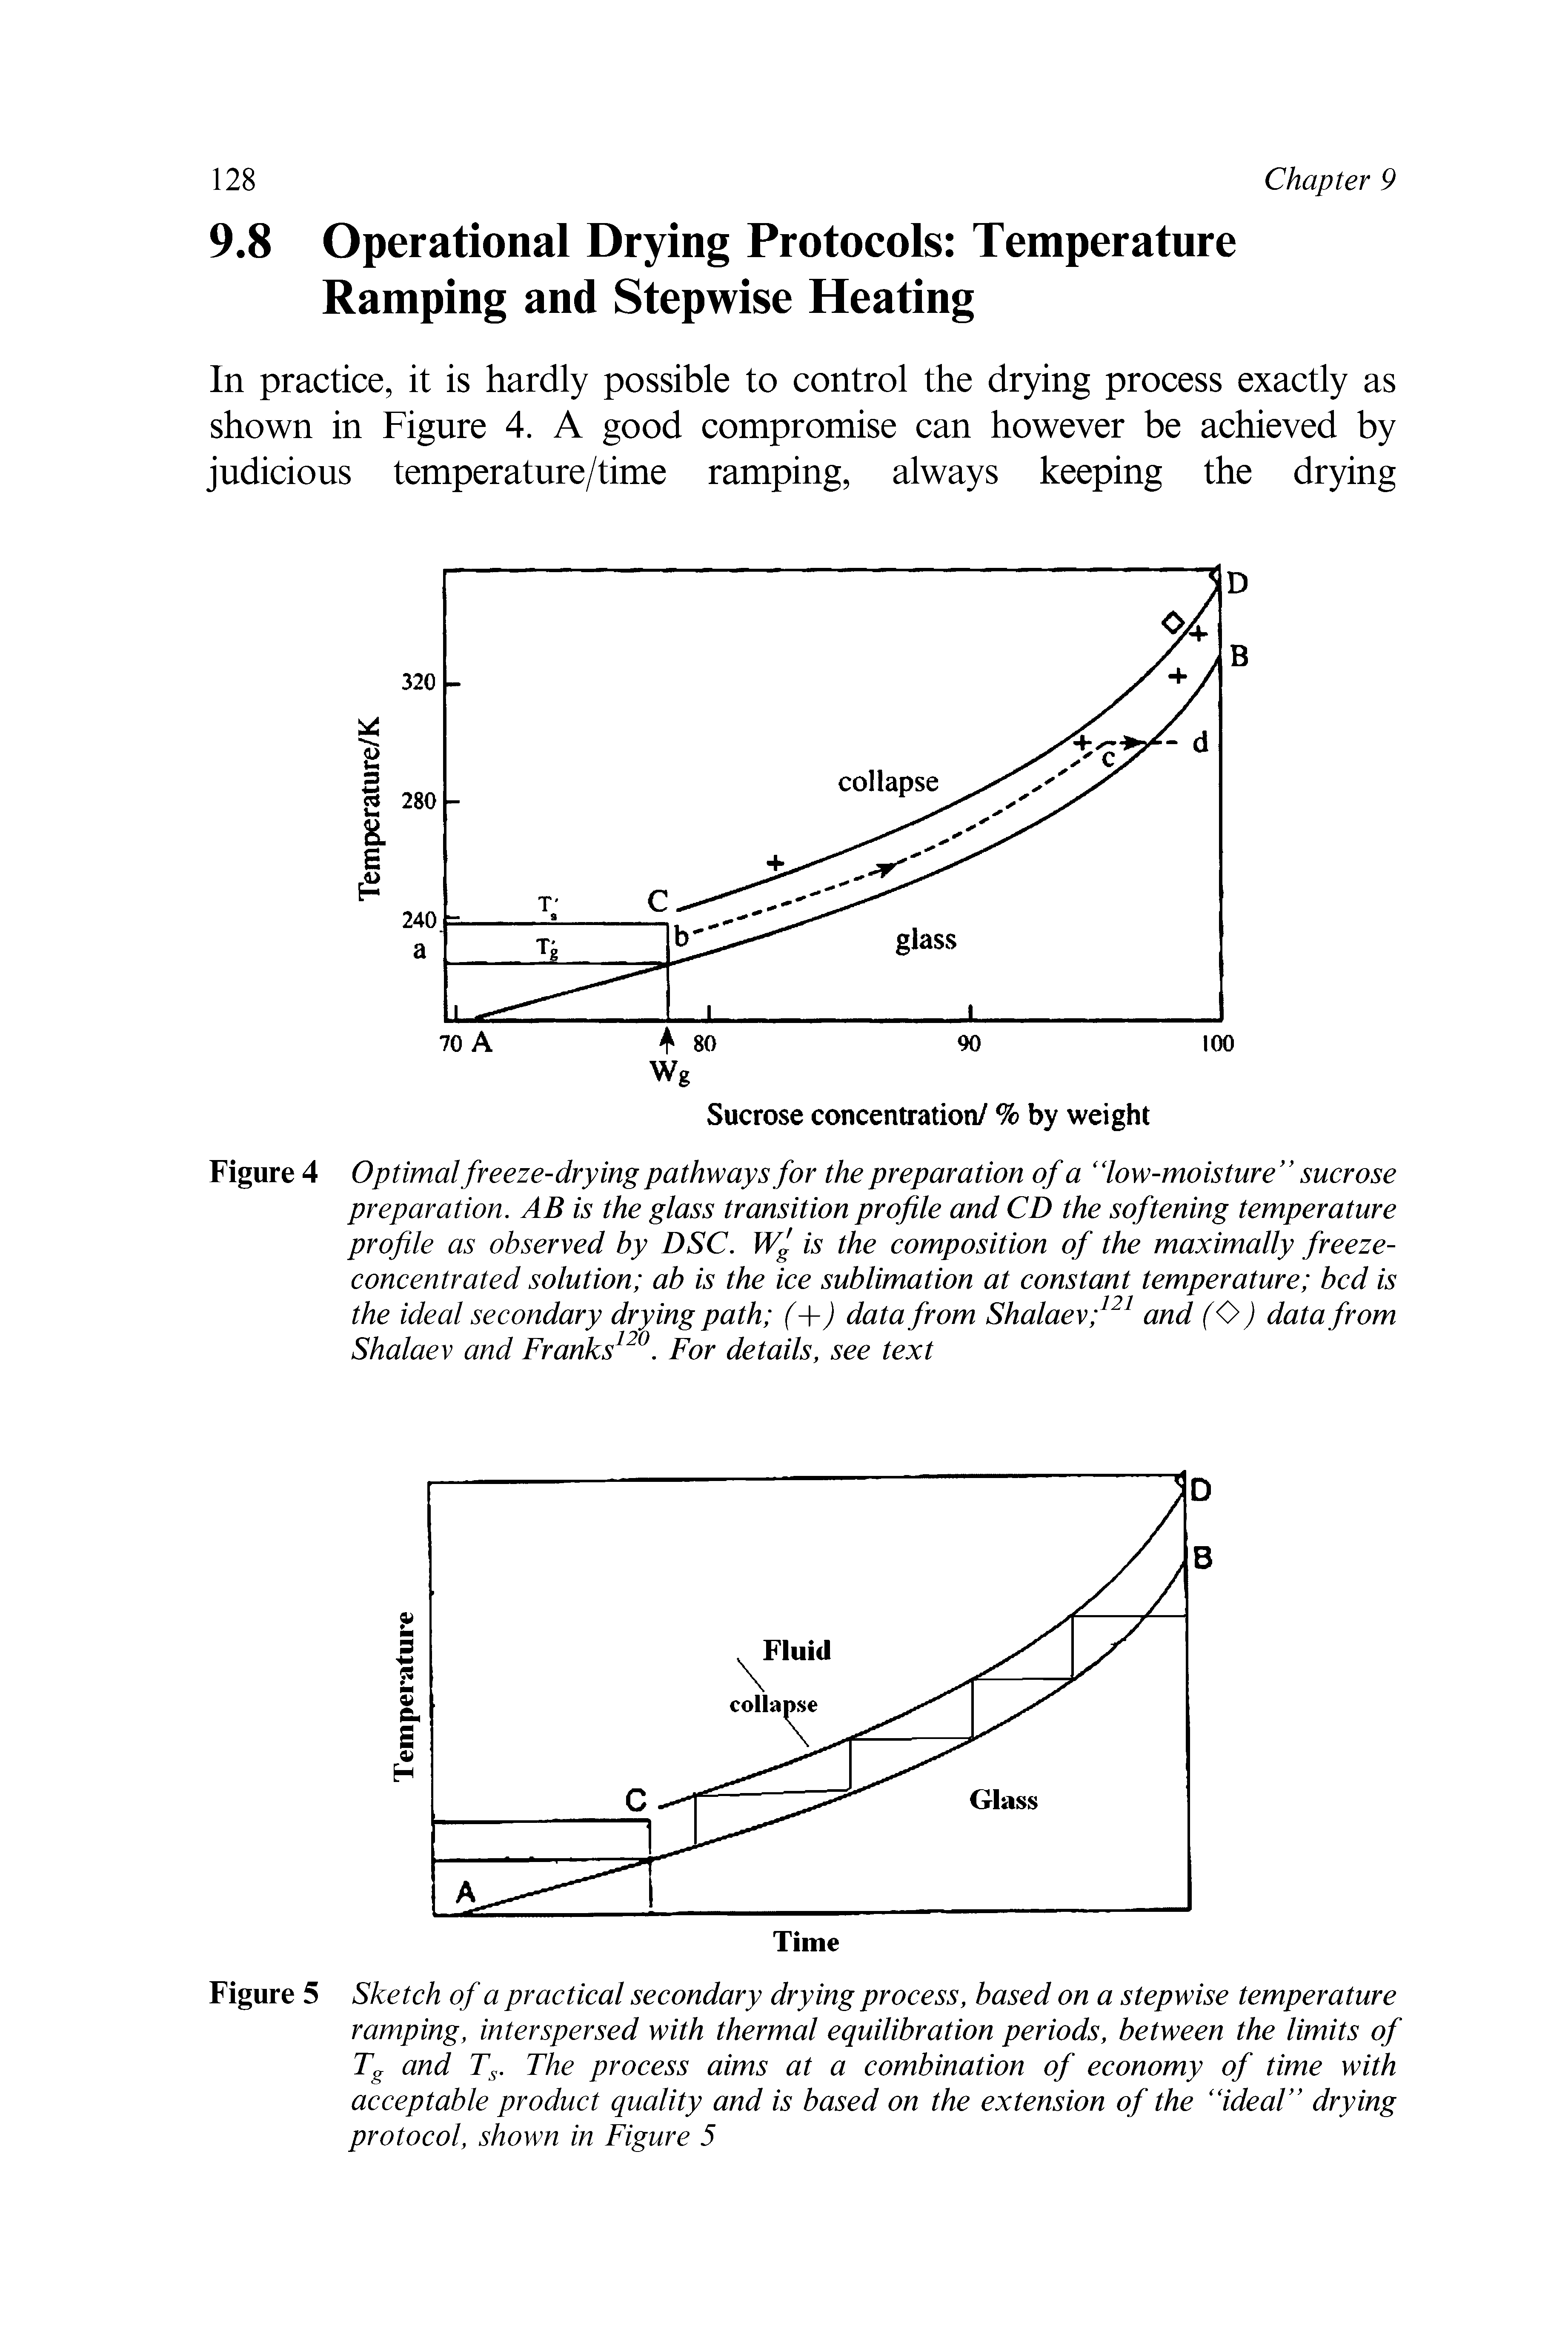 Figure 4 Optimal freeze-drying pathways for the preparation of a low-moisture sucrose preparation. AB is the glass transition profile and CD the softening temperature profile as observed by DSC. Wj is the composition of the maximally freezeconcentrated solution ab is the ice sublimation at constant temperature bed is the ideal secondary drying path (- ) data from Shalaev and (O) data from Shalaev and Franks. For details, see text...